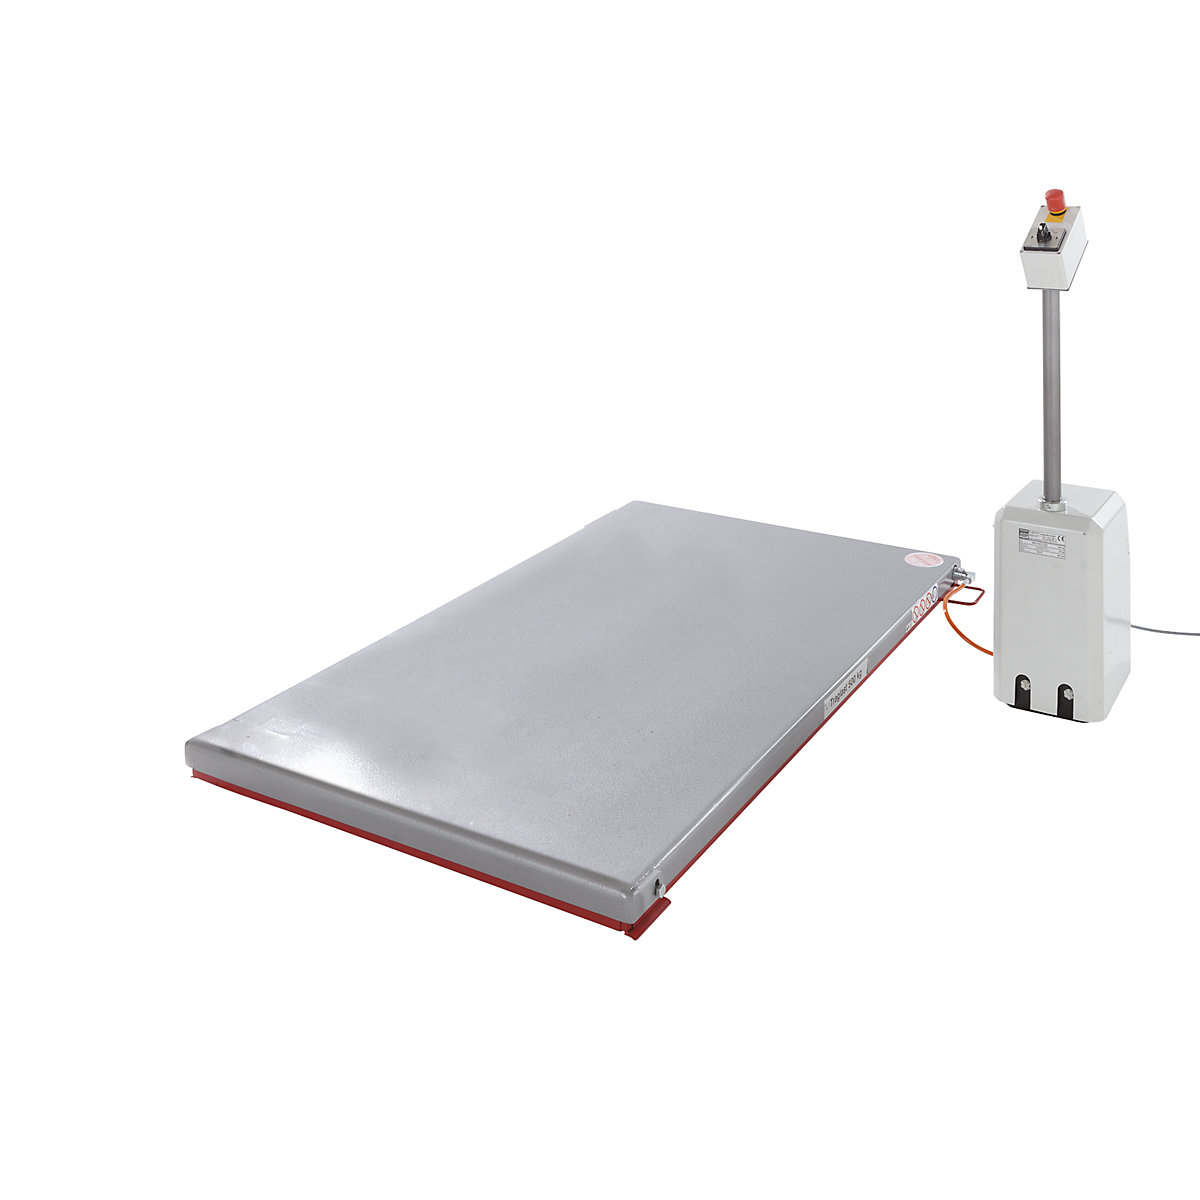 Low profile lift table, G series – Flexlift, max. load 1000 kg, lifting range 80 – 850 mm, LxW 1600 x 900 mm, 400 V 3-phase